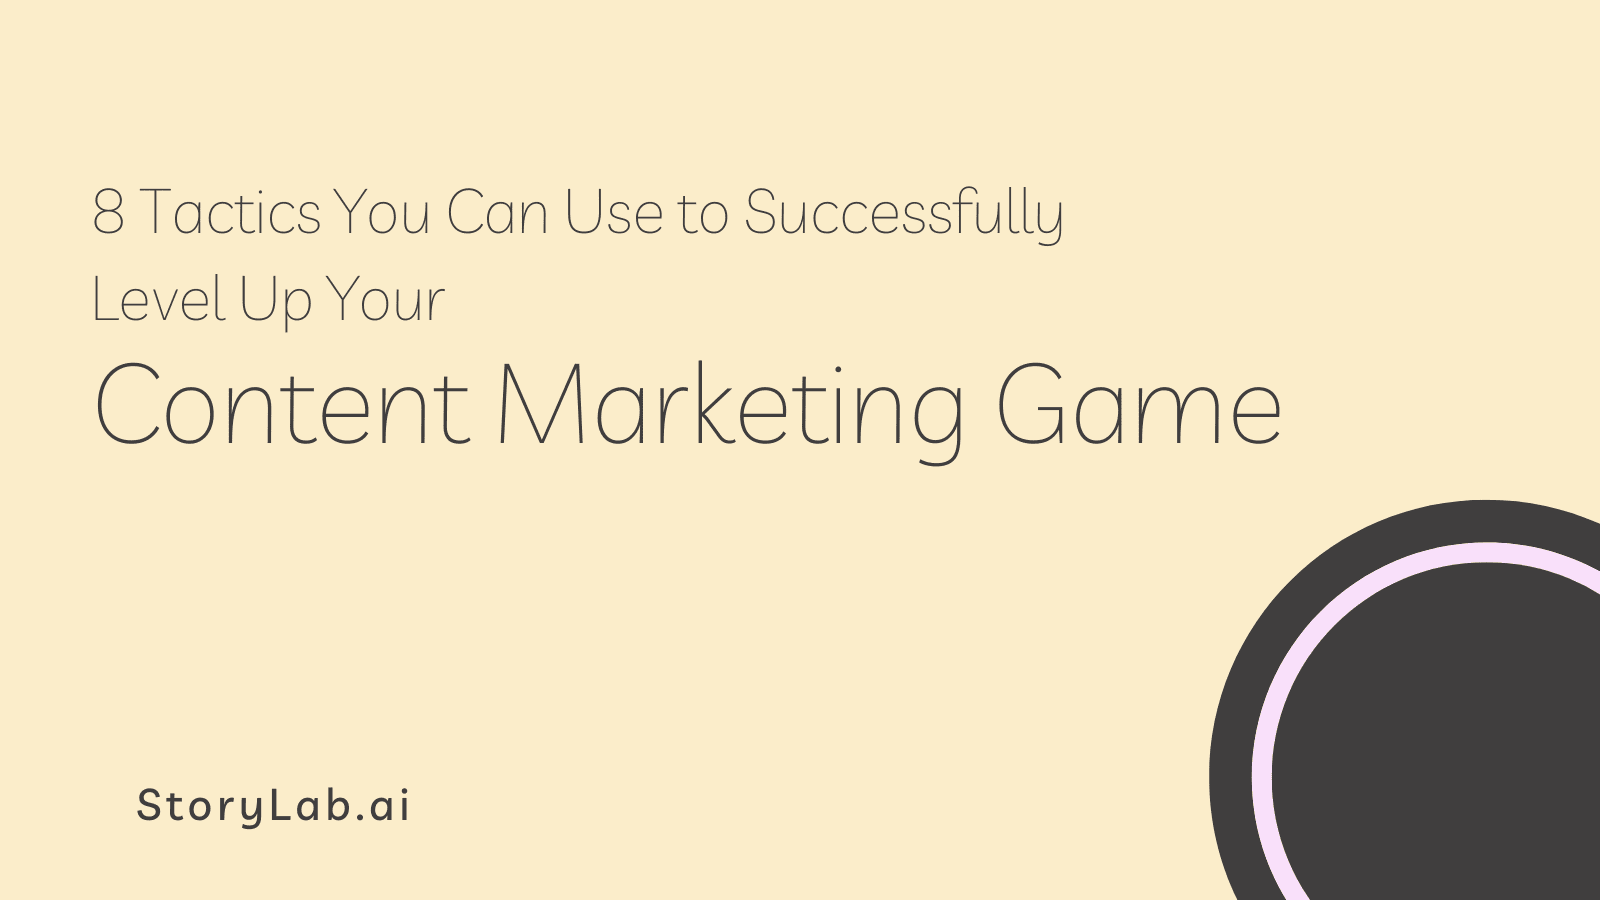 Level up your Content Marketing Game